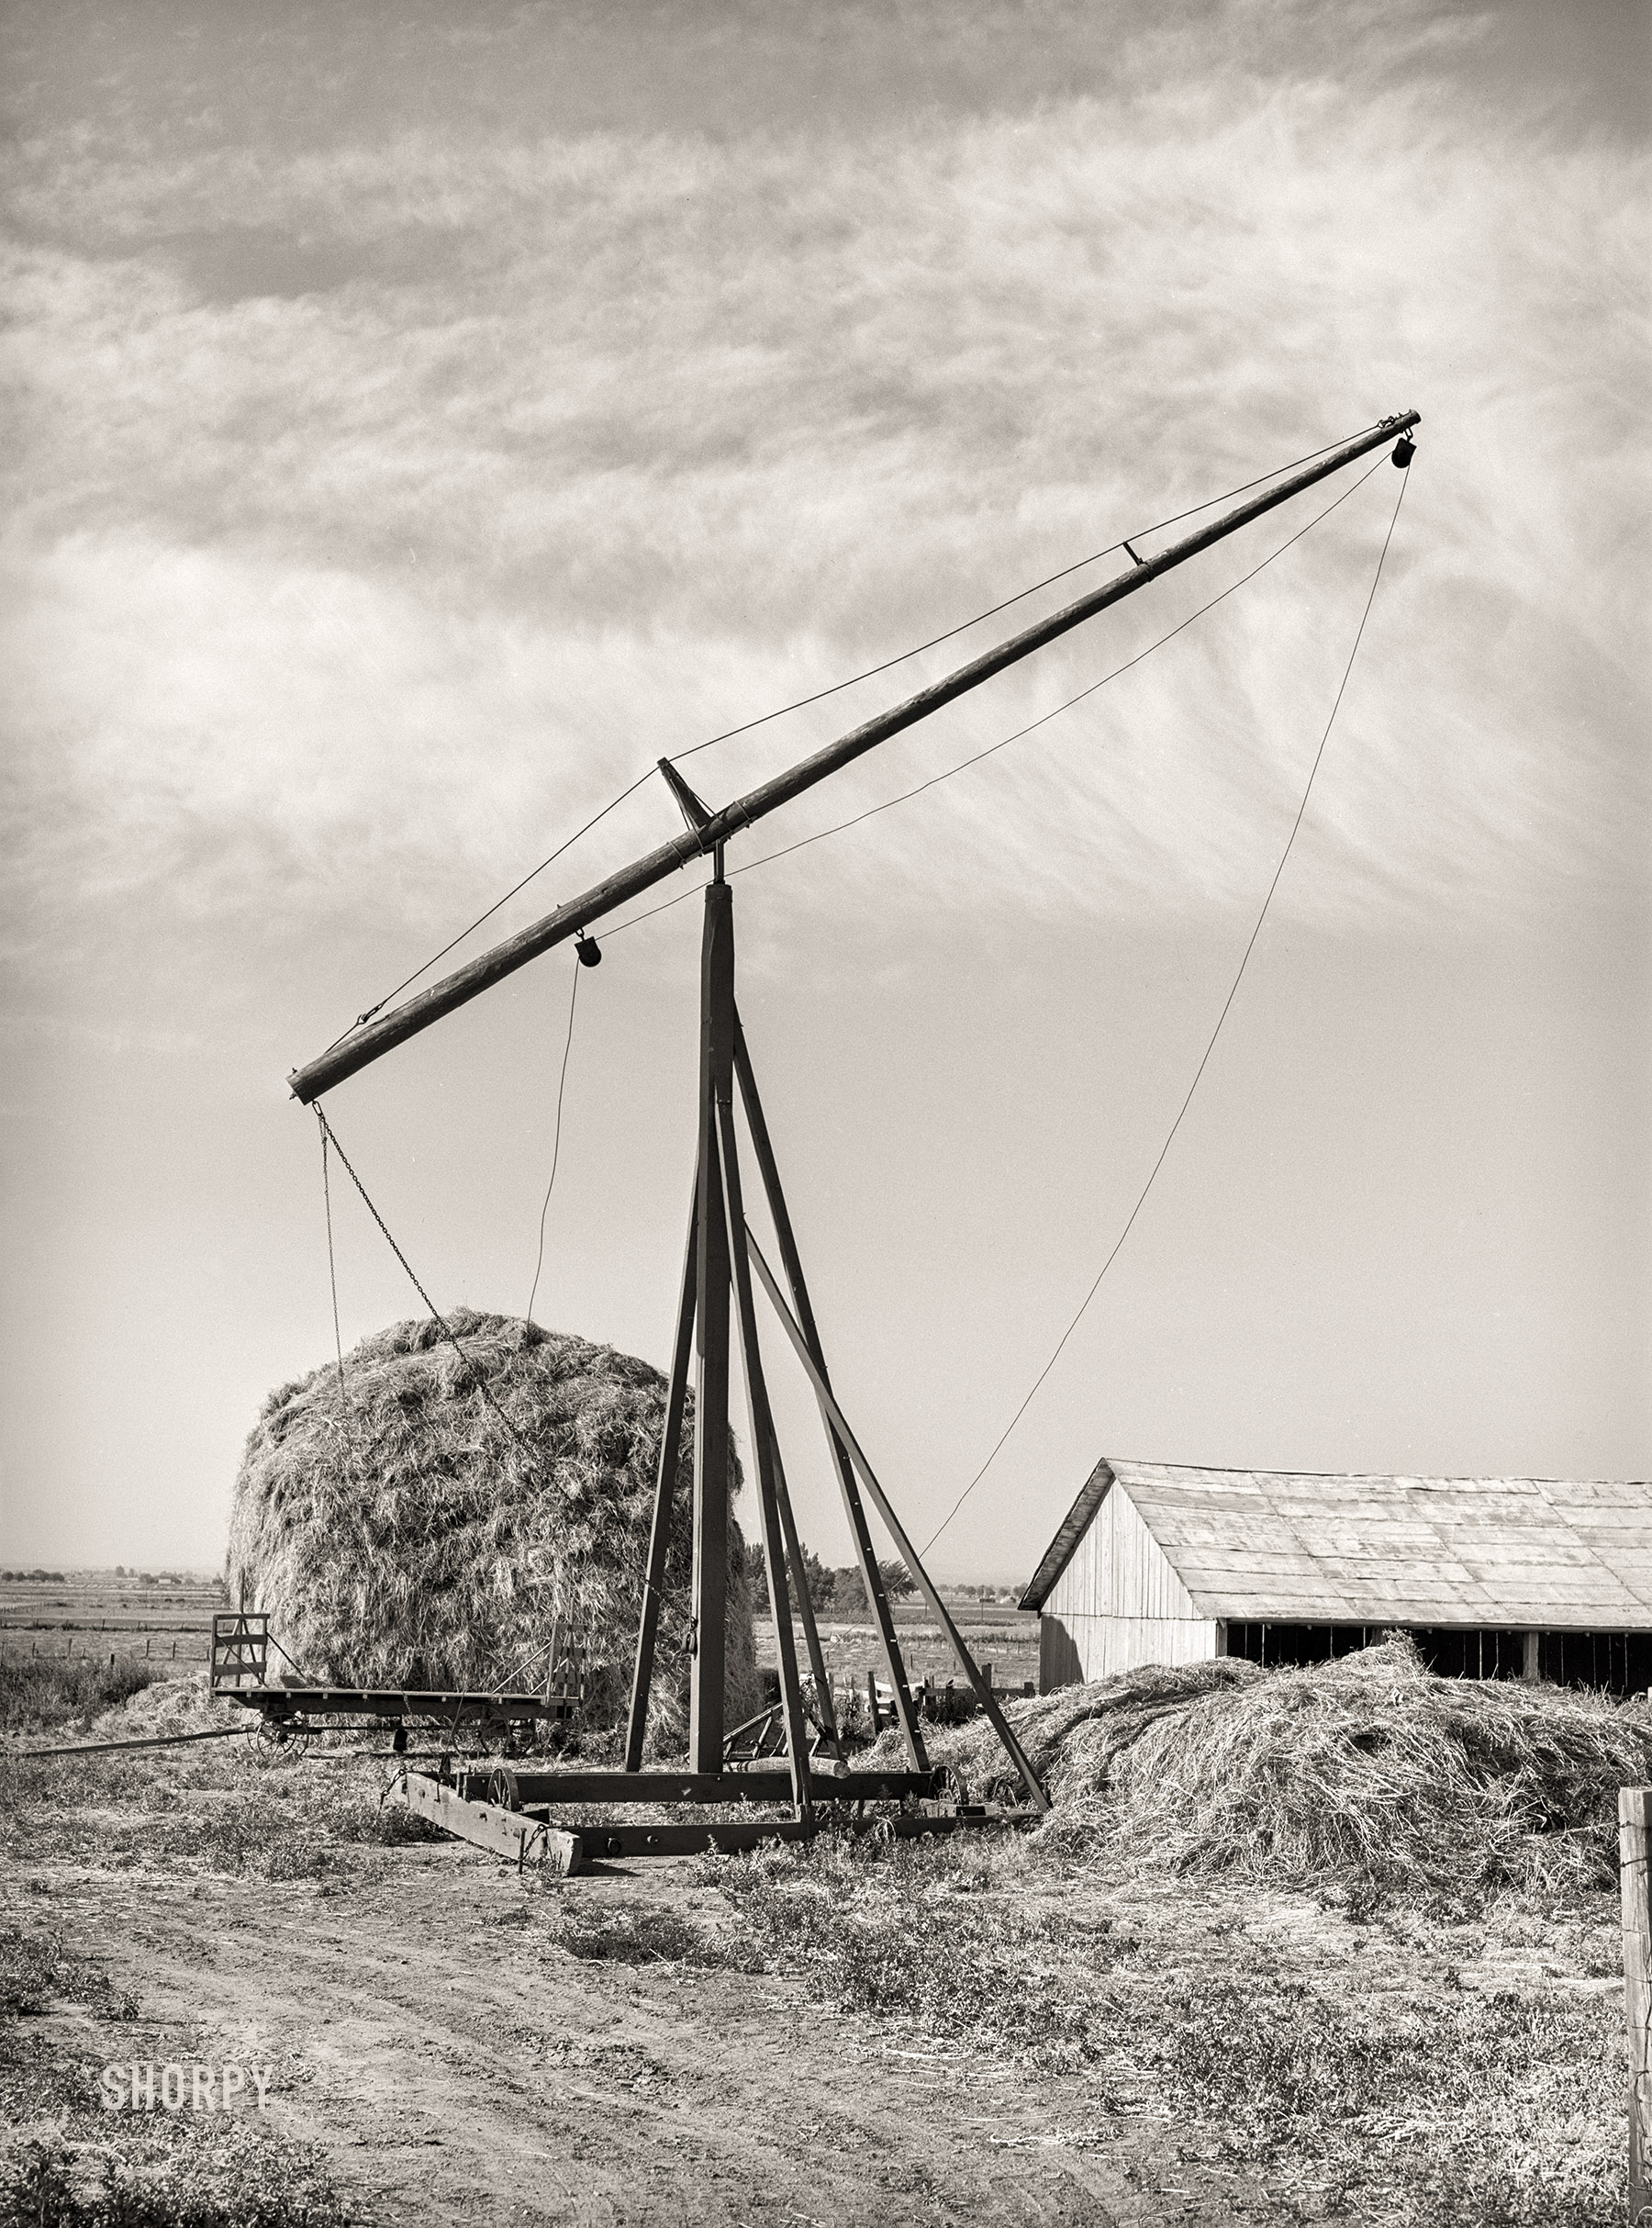 June 1941. "Hay stacker and haystack on farm of member of the Dairymen's Cooperative Creamery. Caldwell, Canyon County, Idaho." Medium format acetate negative by Russell Lee for the Farm Security Administration. View full size.